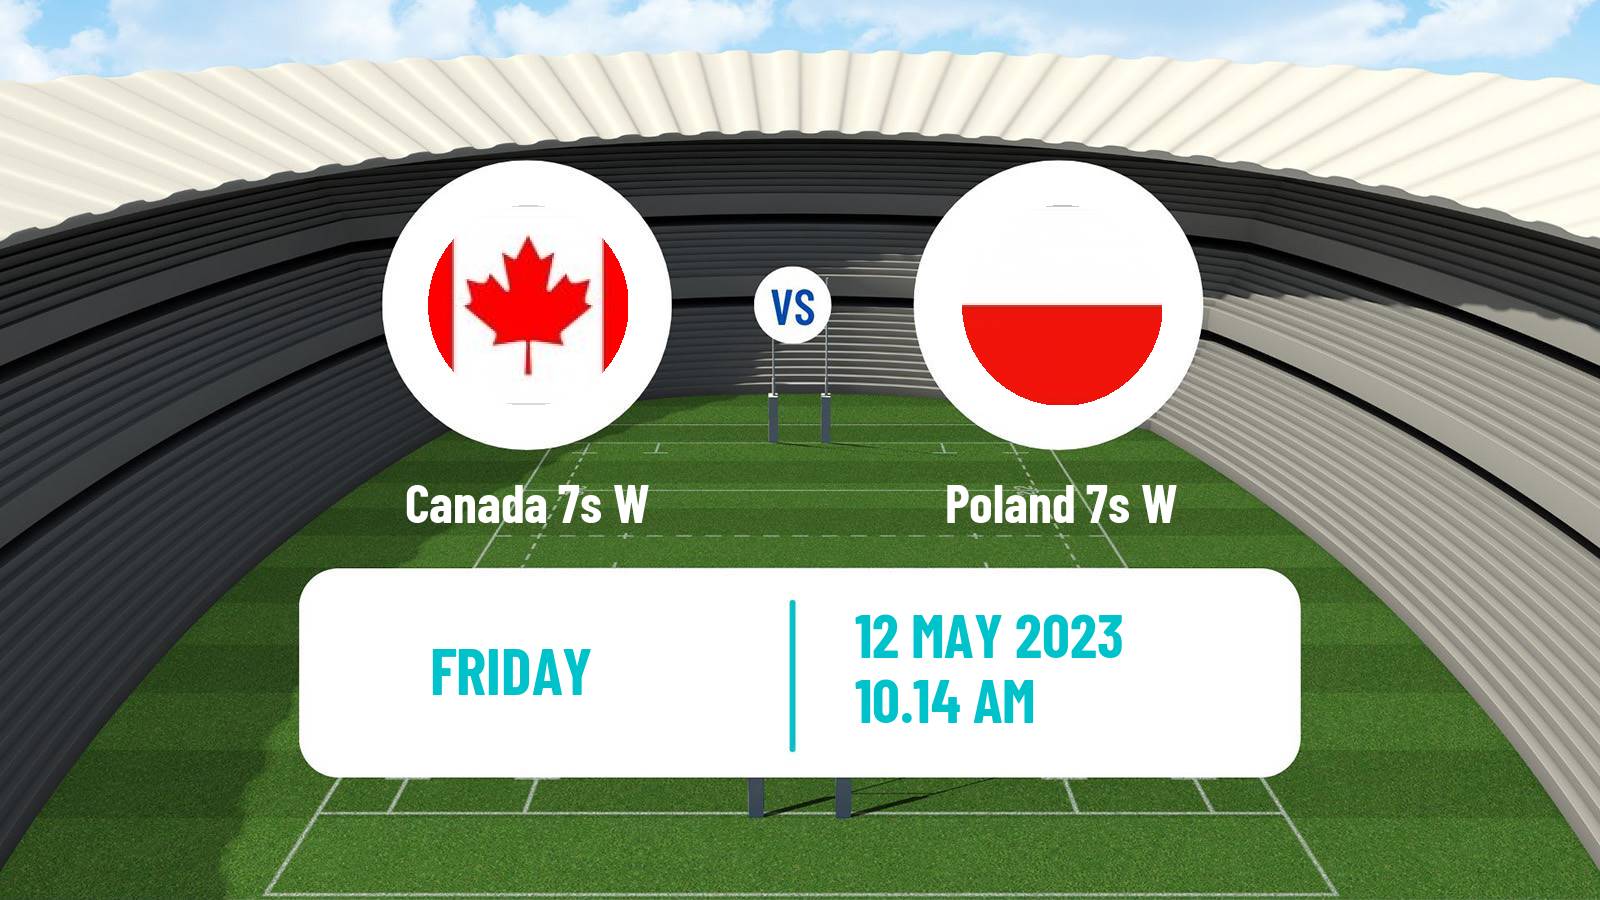 Rugby union Sevens World Series Women - France Canada 7s W - Poland 7s W